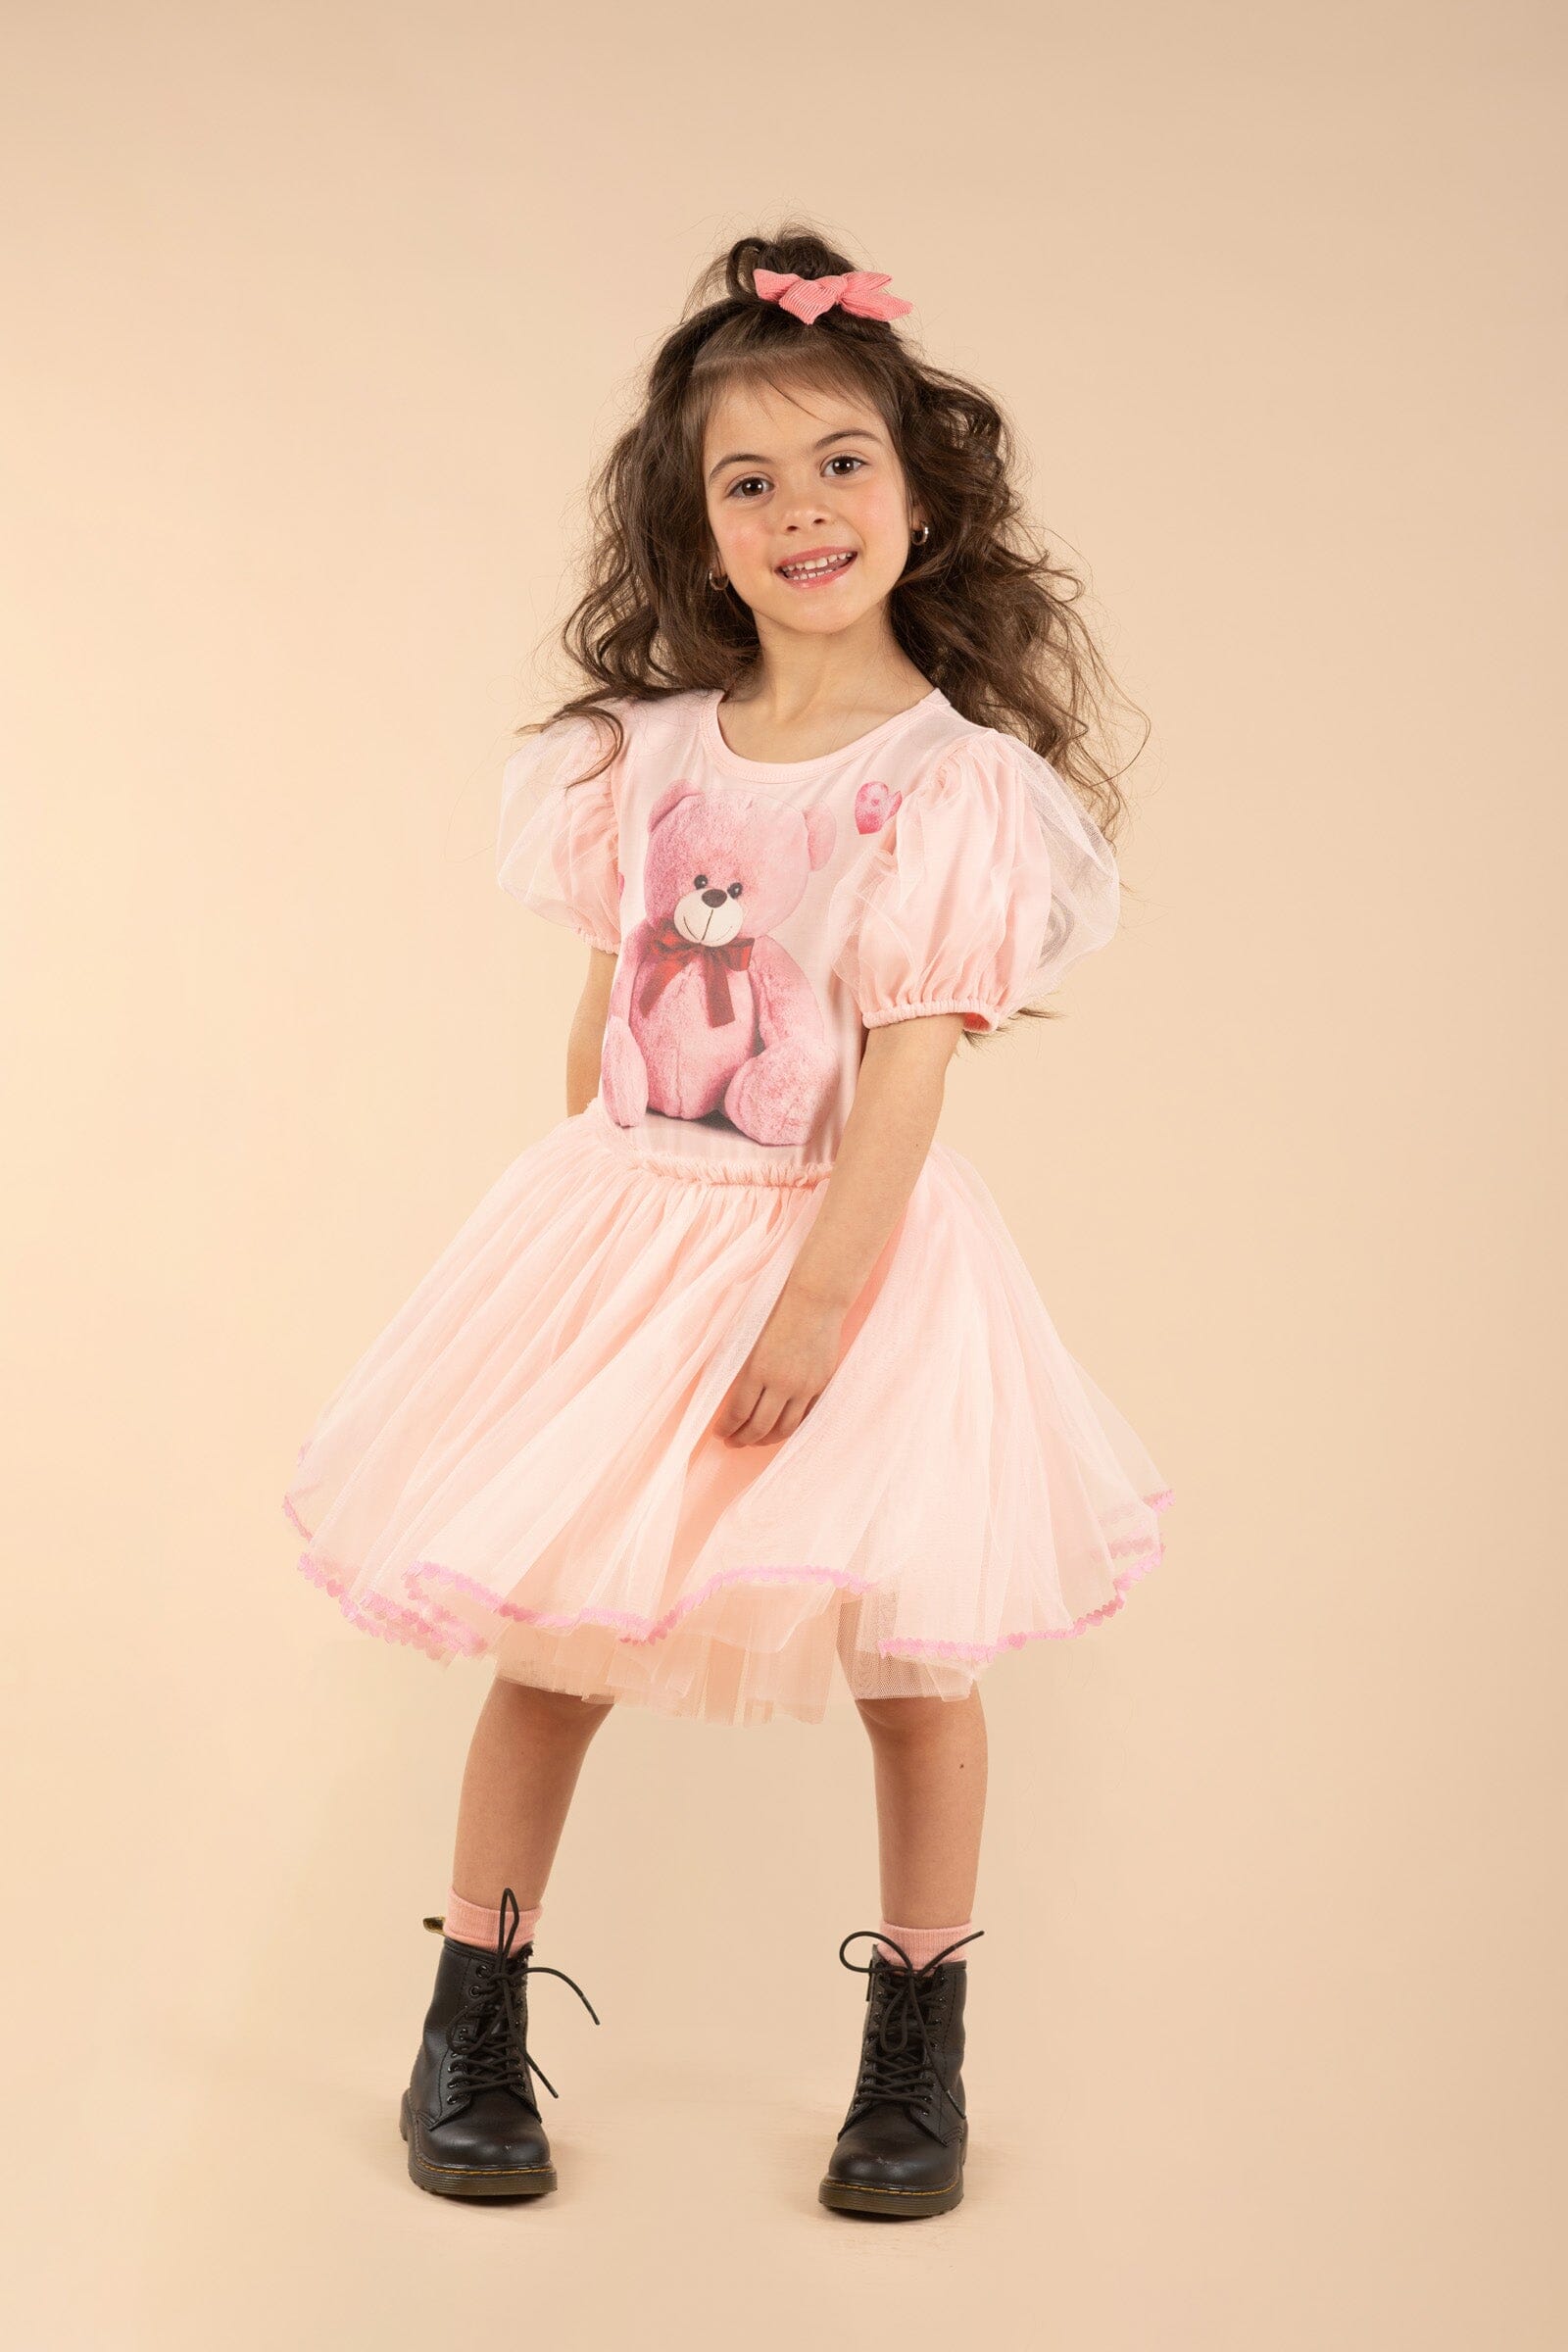 Rock Your Kid - TEDDY CIRCUS DRESS - Pink ** PRE ORDER / DUE MID-SEP ** Girls Rock Your Baby